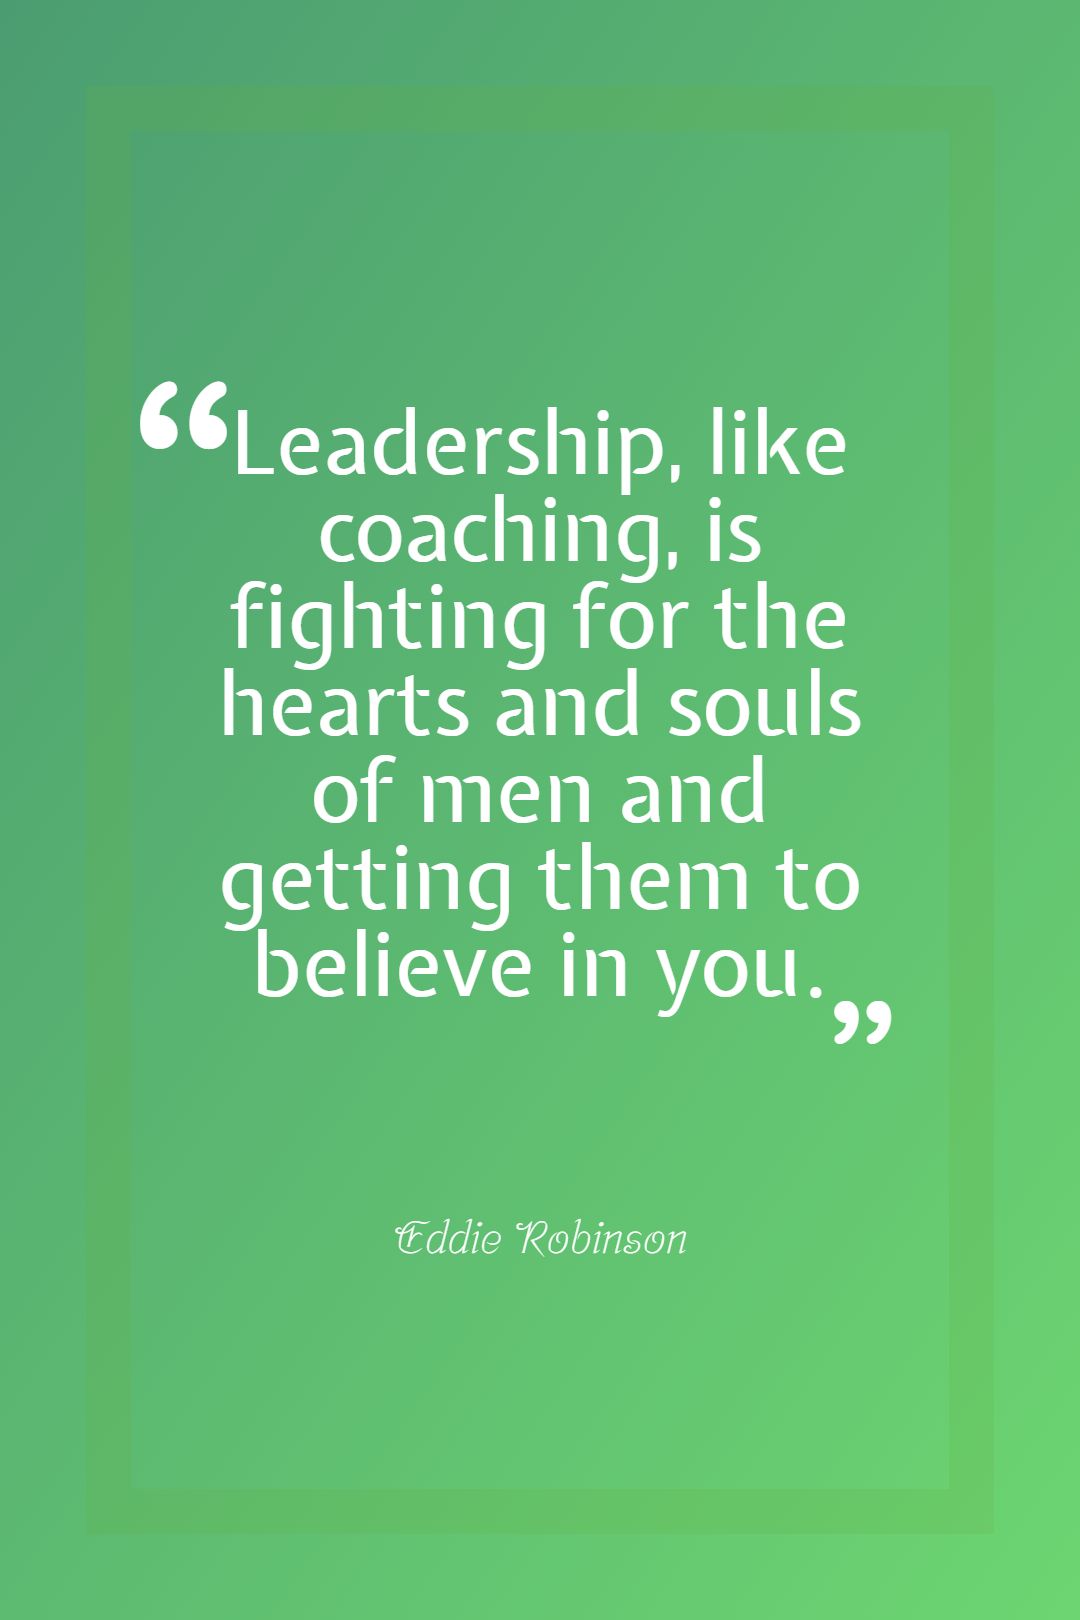 Leadership like coaching is fighting for the hearts and souls of men and getting them to believe in you.